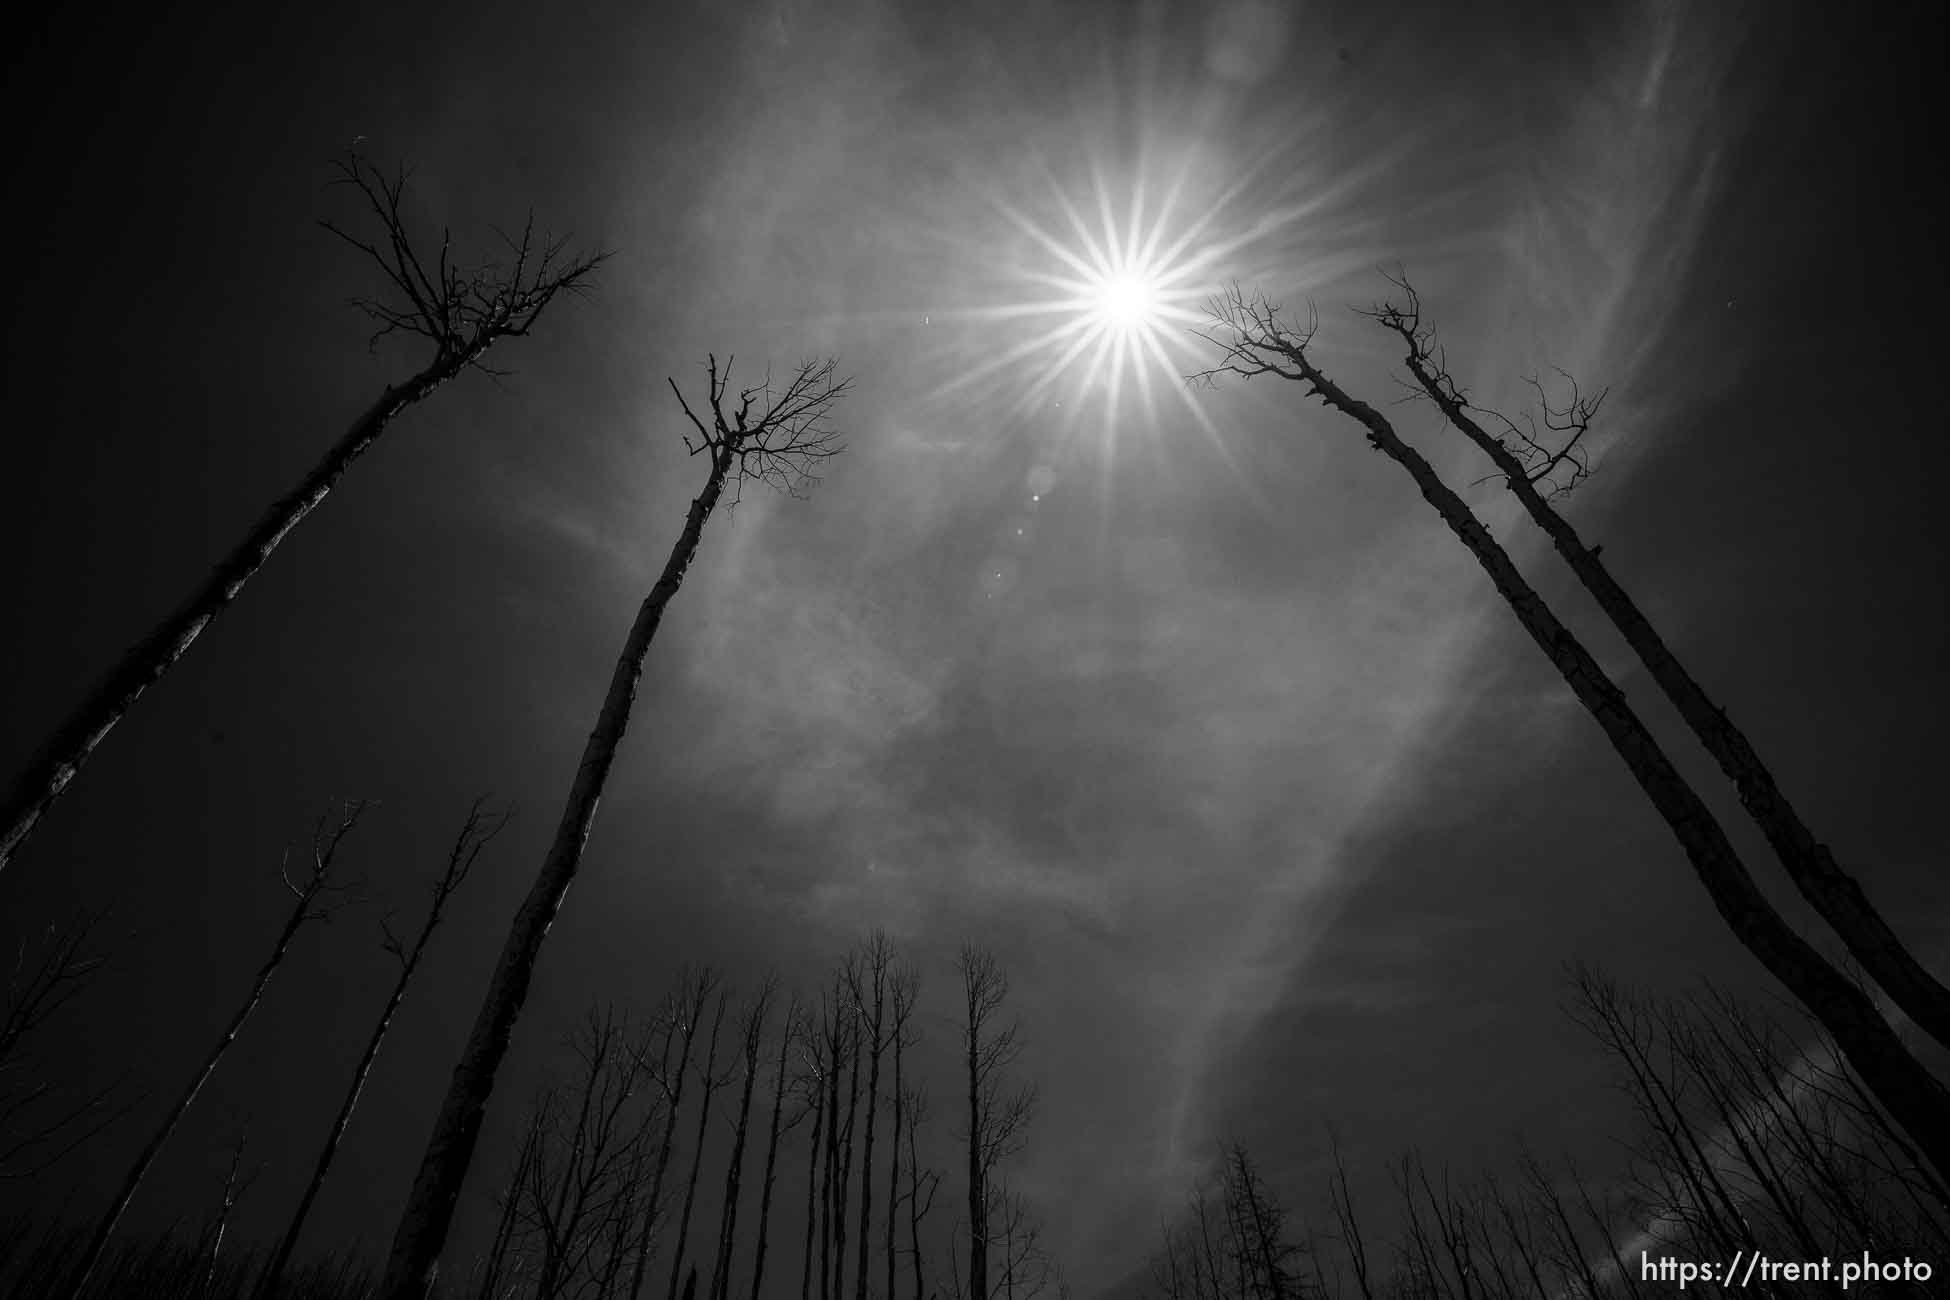 Looking up at the sun in a fire-scorched forest along Tukuhnikivatz Spring Trail,